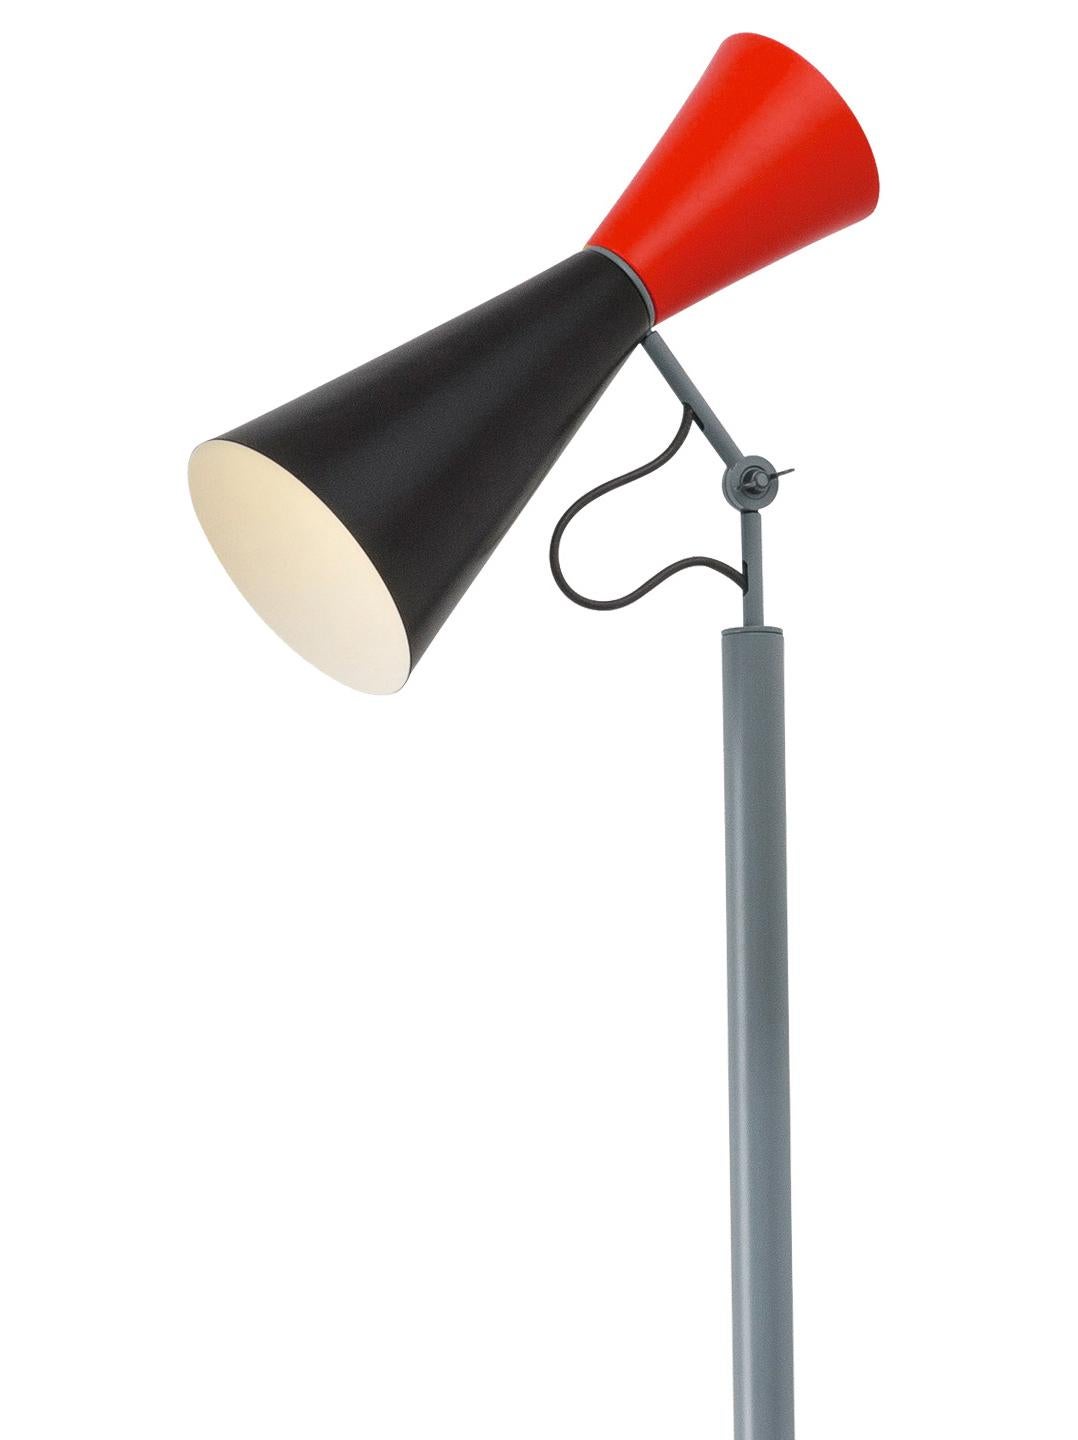 Le Corbusier 'Parliament' floor lamp for Nemo in black and red. 

Le Corbusier designed the Parliament lamp for the Chandigarh Parliament in India. This iconic floor lamp features a two-way light source, with a dual-cone design executed in painted